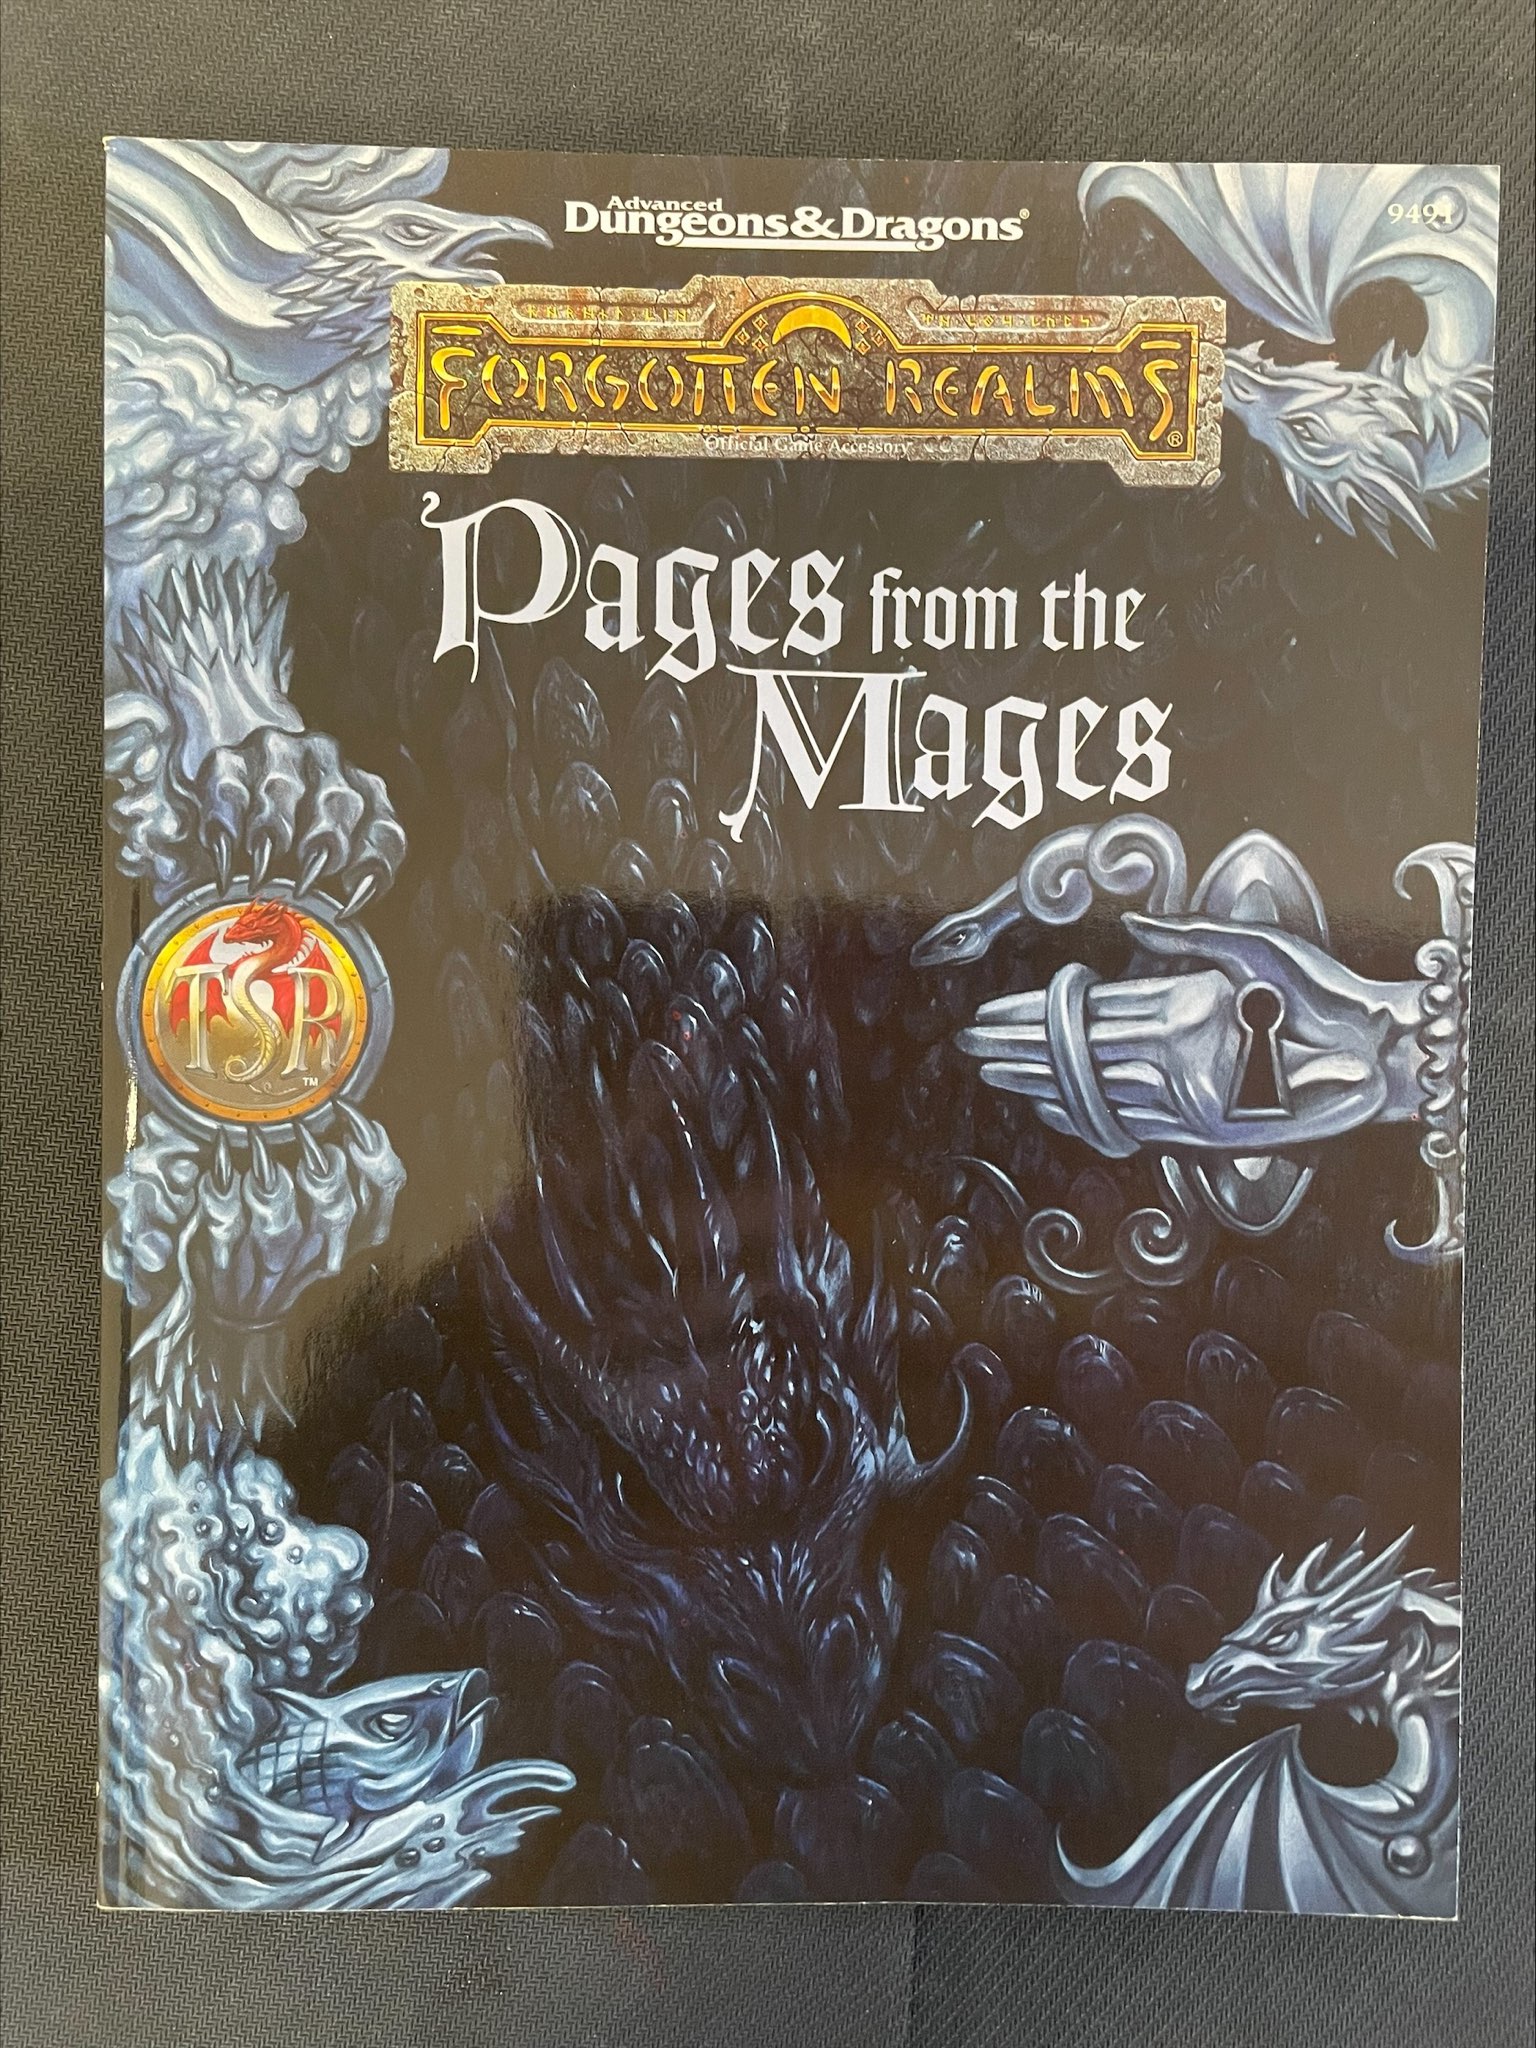 Boite de AD&D : Forgotten Realms - Pages from the Mages 9491 (Occasion - Voir photos)